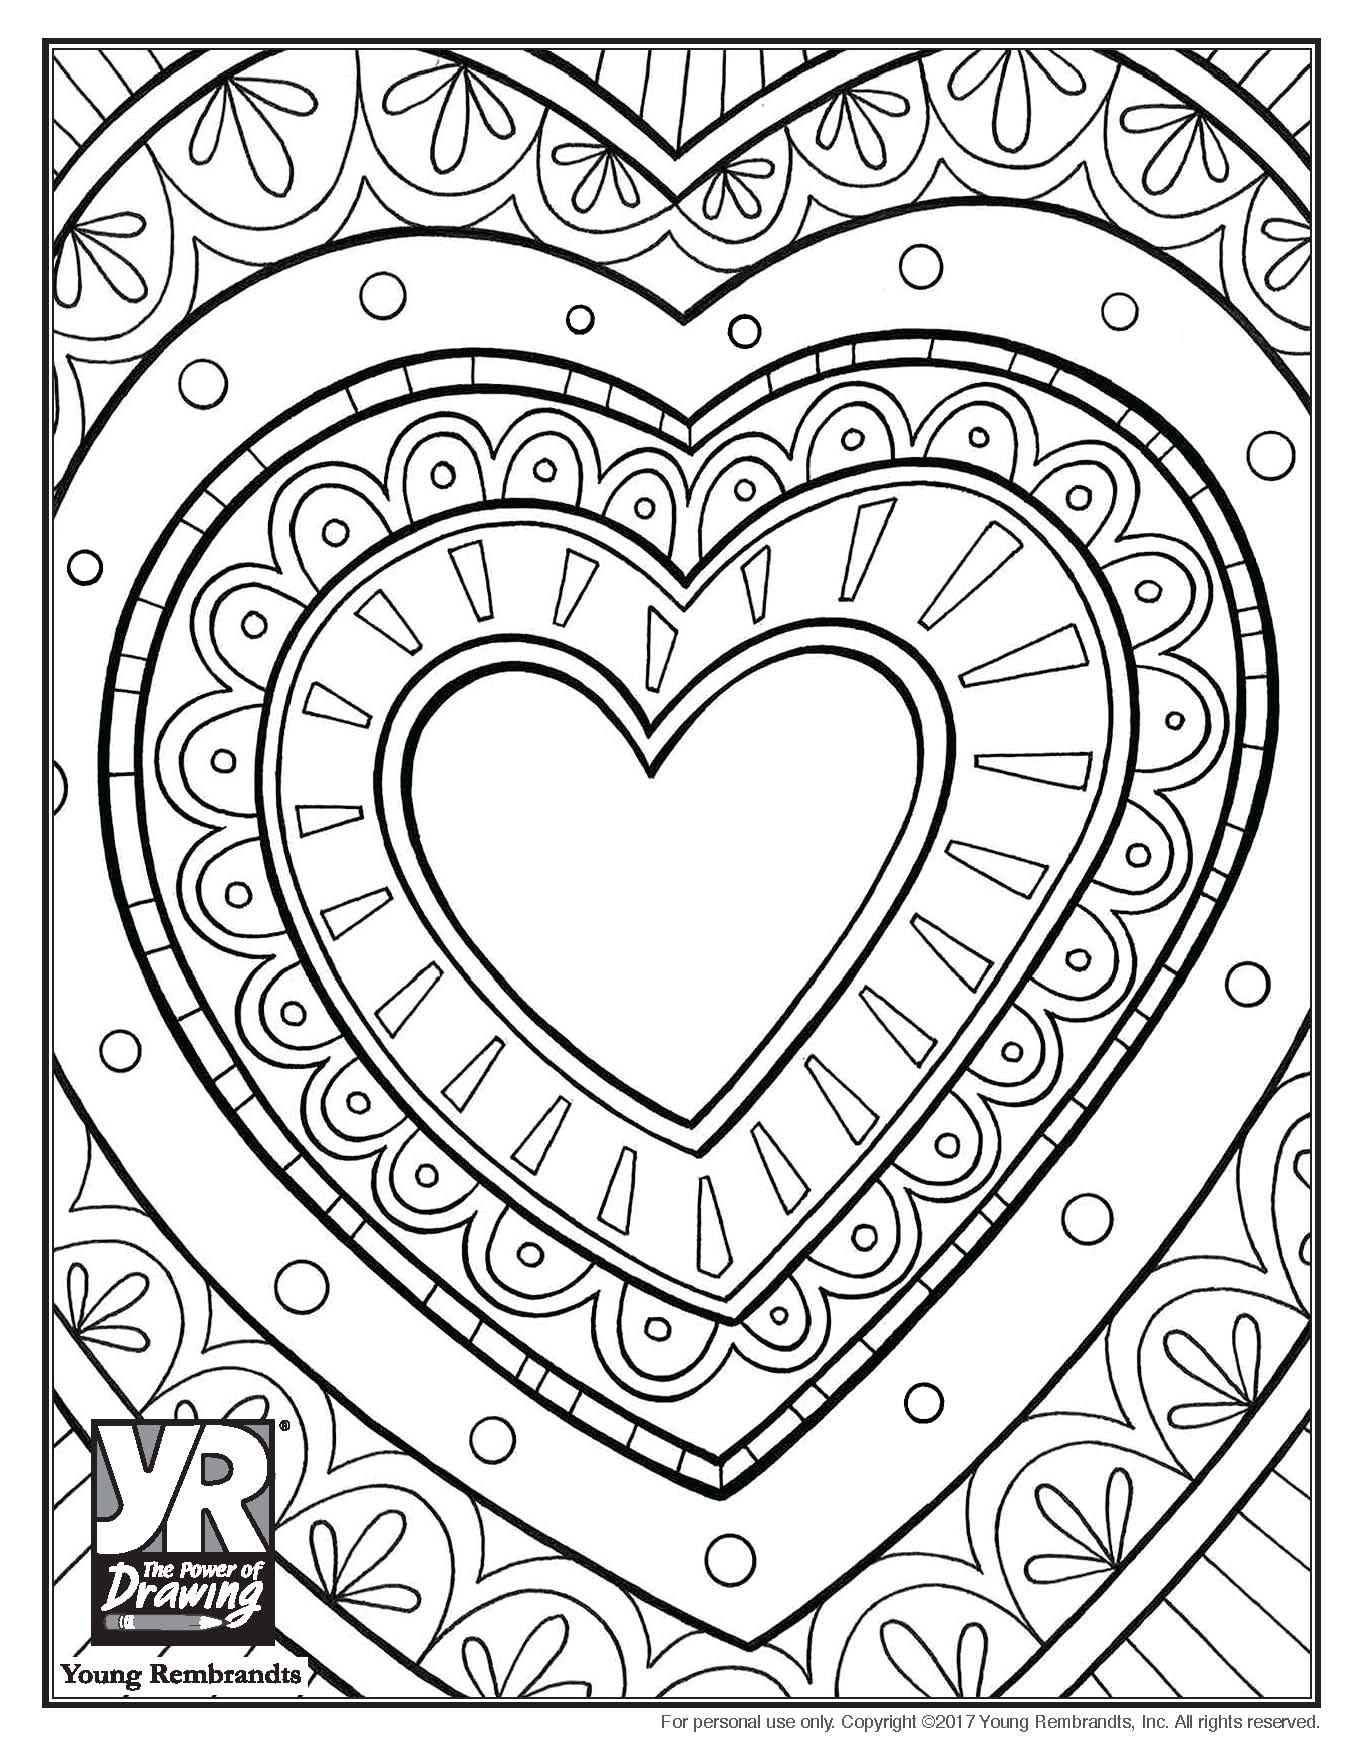 Doily Heart Coloring Page - Young Rembrandts Shop